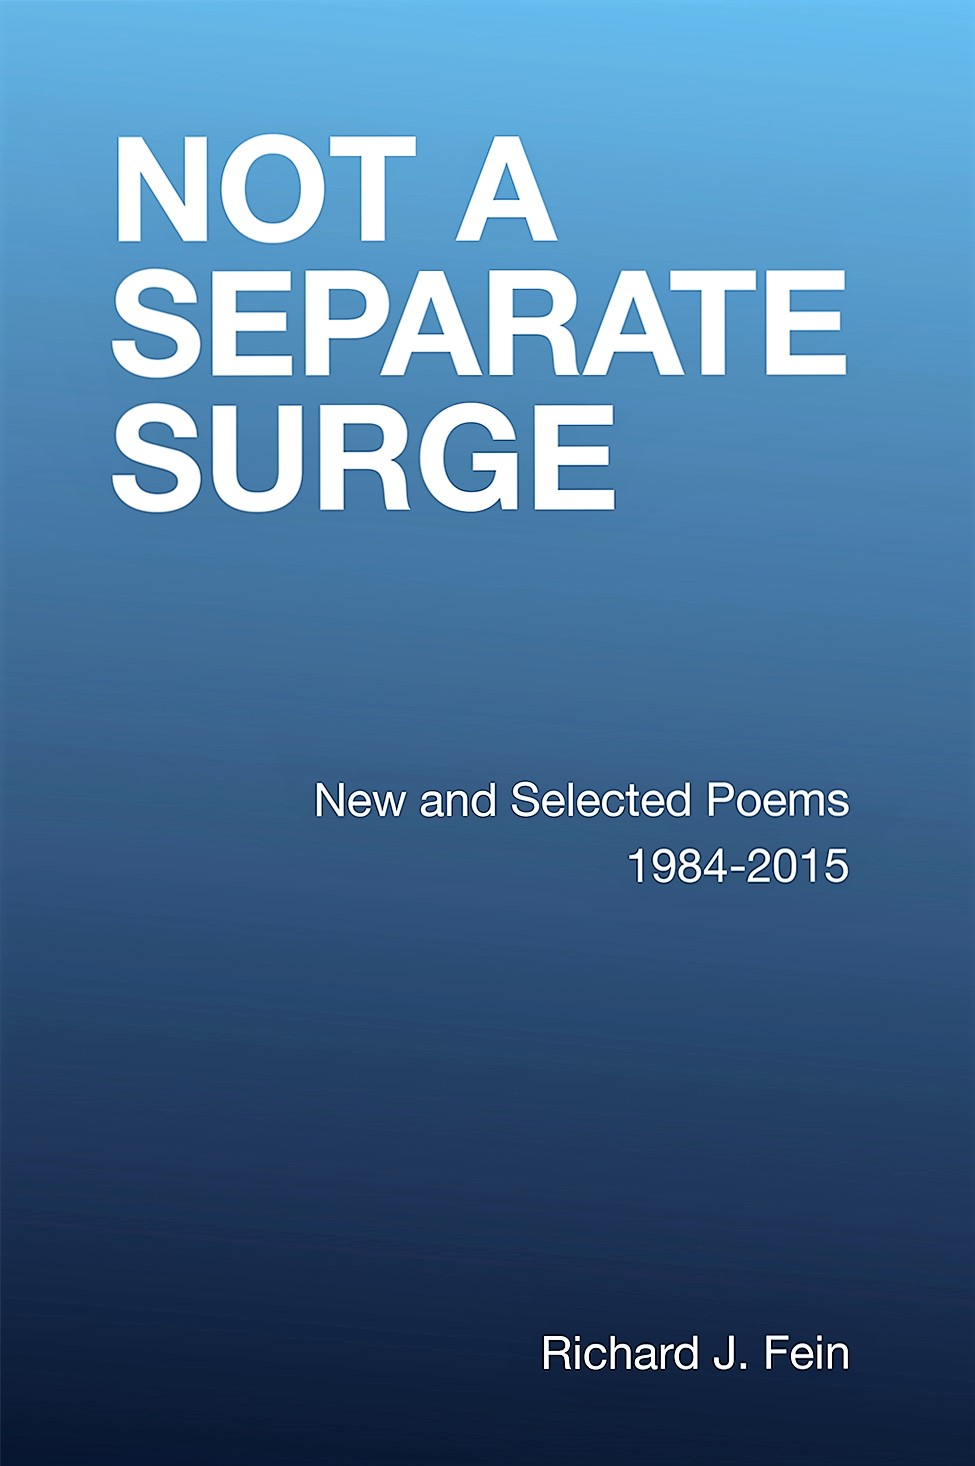 Text-Only Book Cover. Text: NOT A SEPARATE SURGE, New and Selected Poems 1984-2015, Richard J. Fein